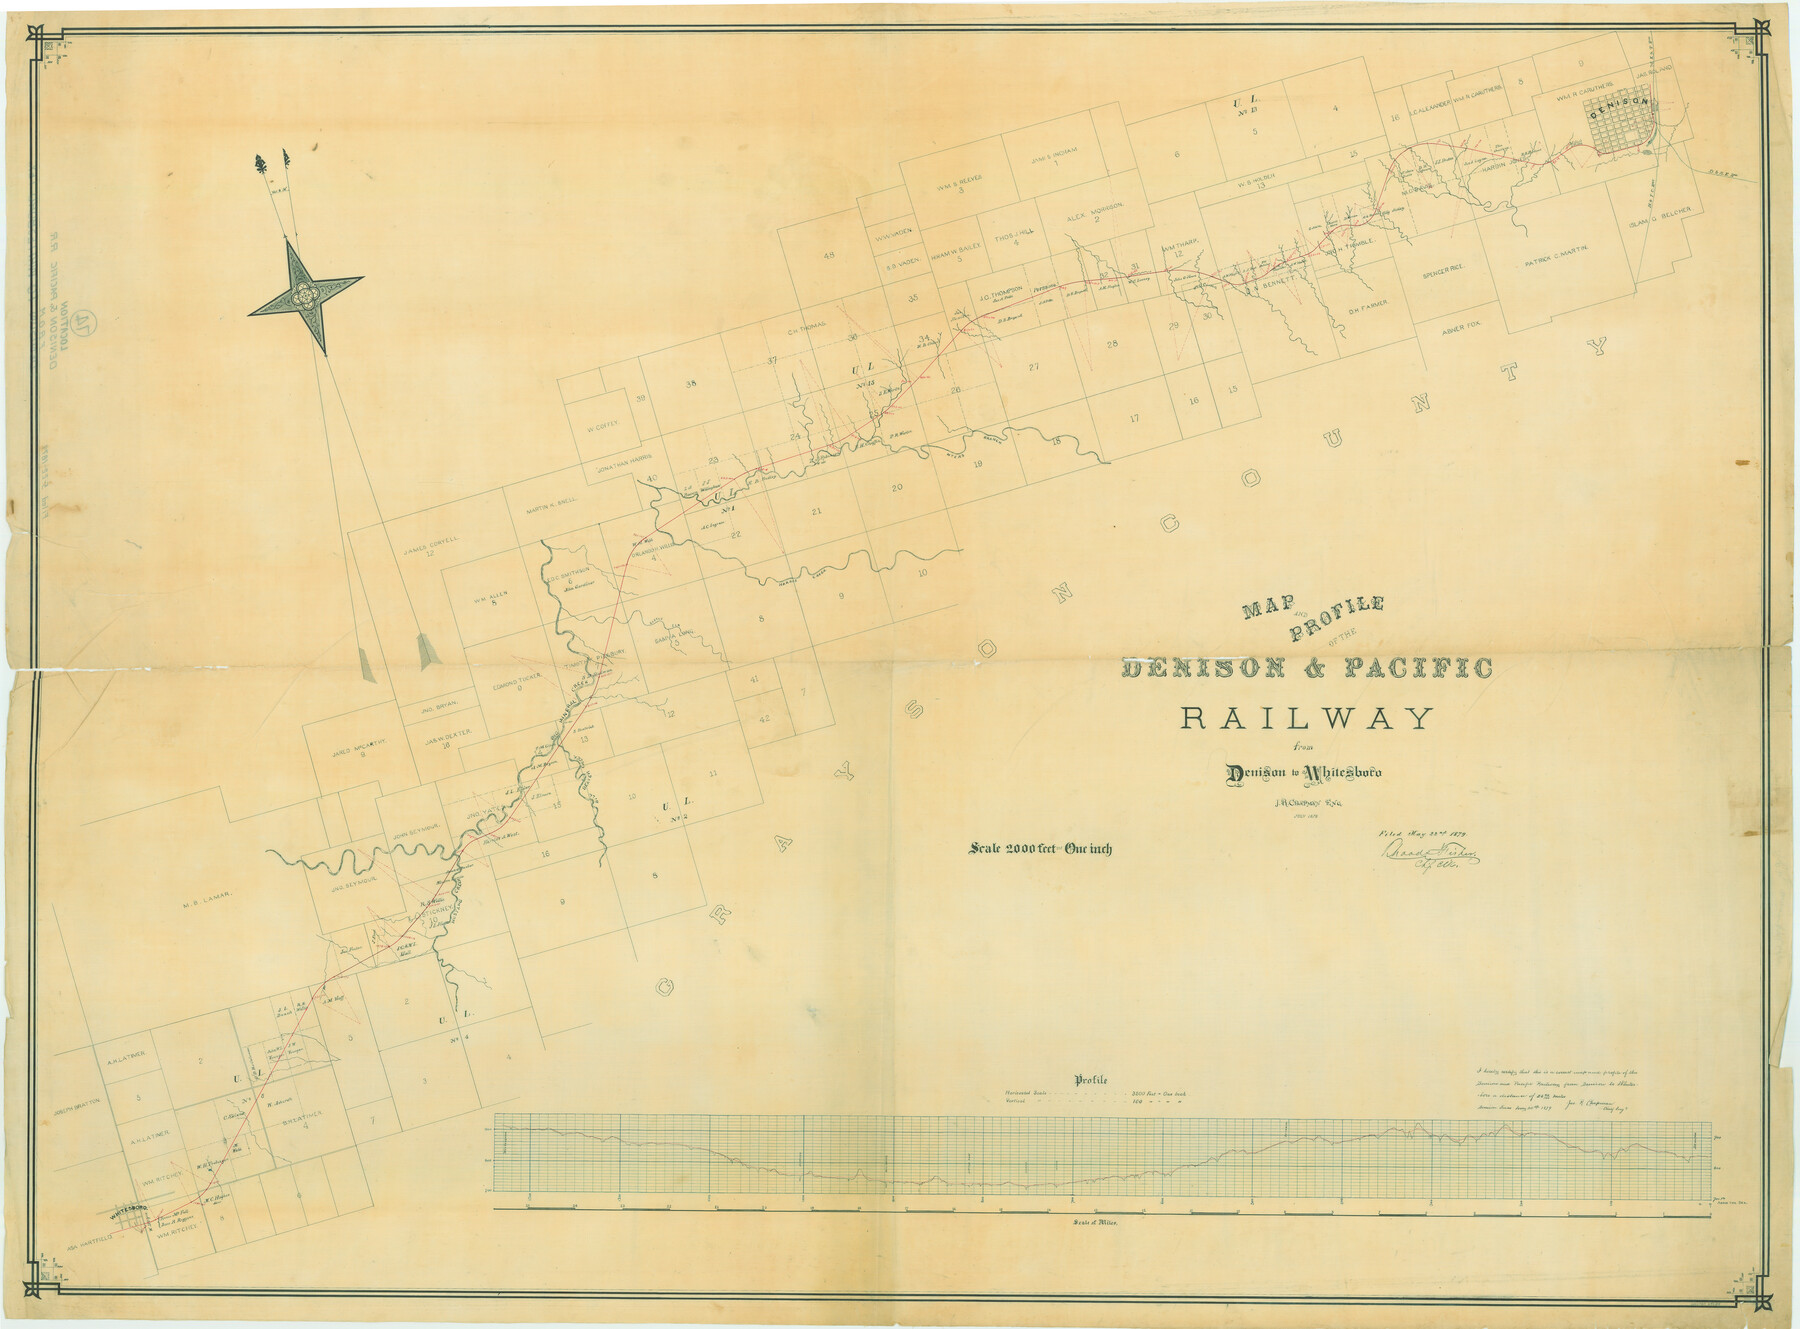 64284, Map and Profile of the Denison and Pacific Railway from Denison to Whitesboro, General Map Collection